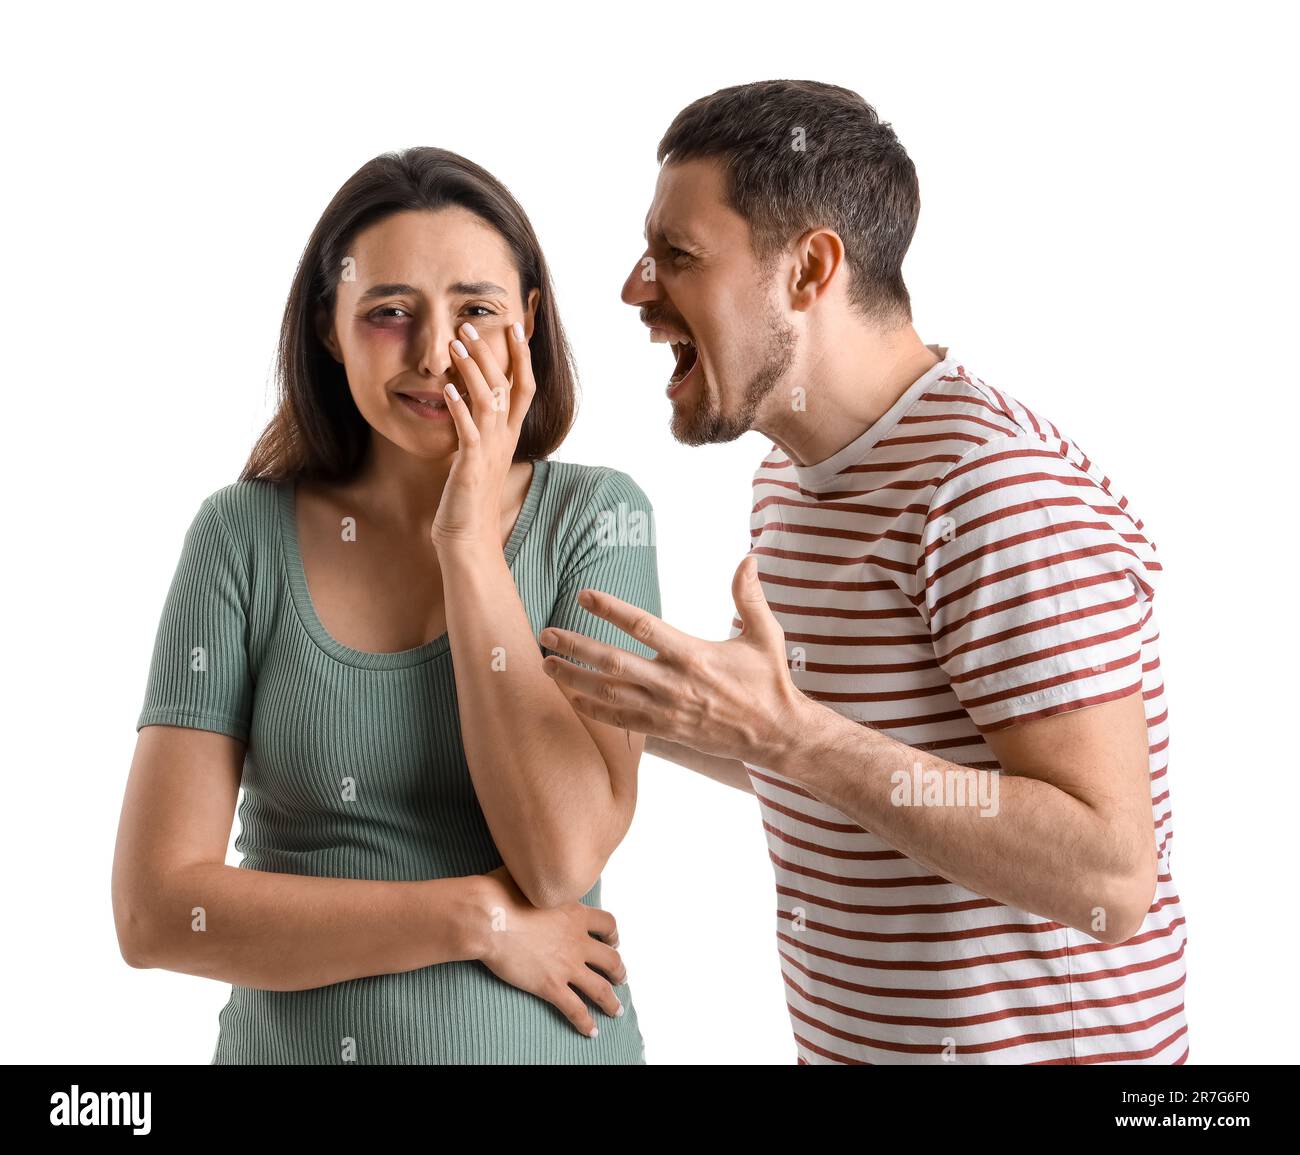 Angry young man shouting at his crying wife on white background. Domestic violence concept Stock Photo